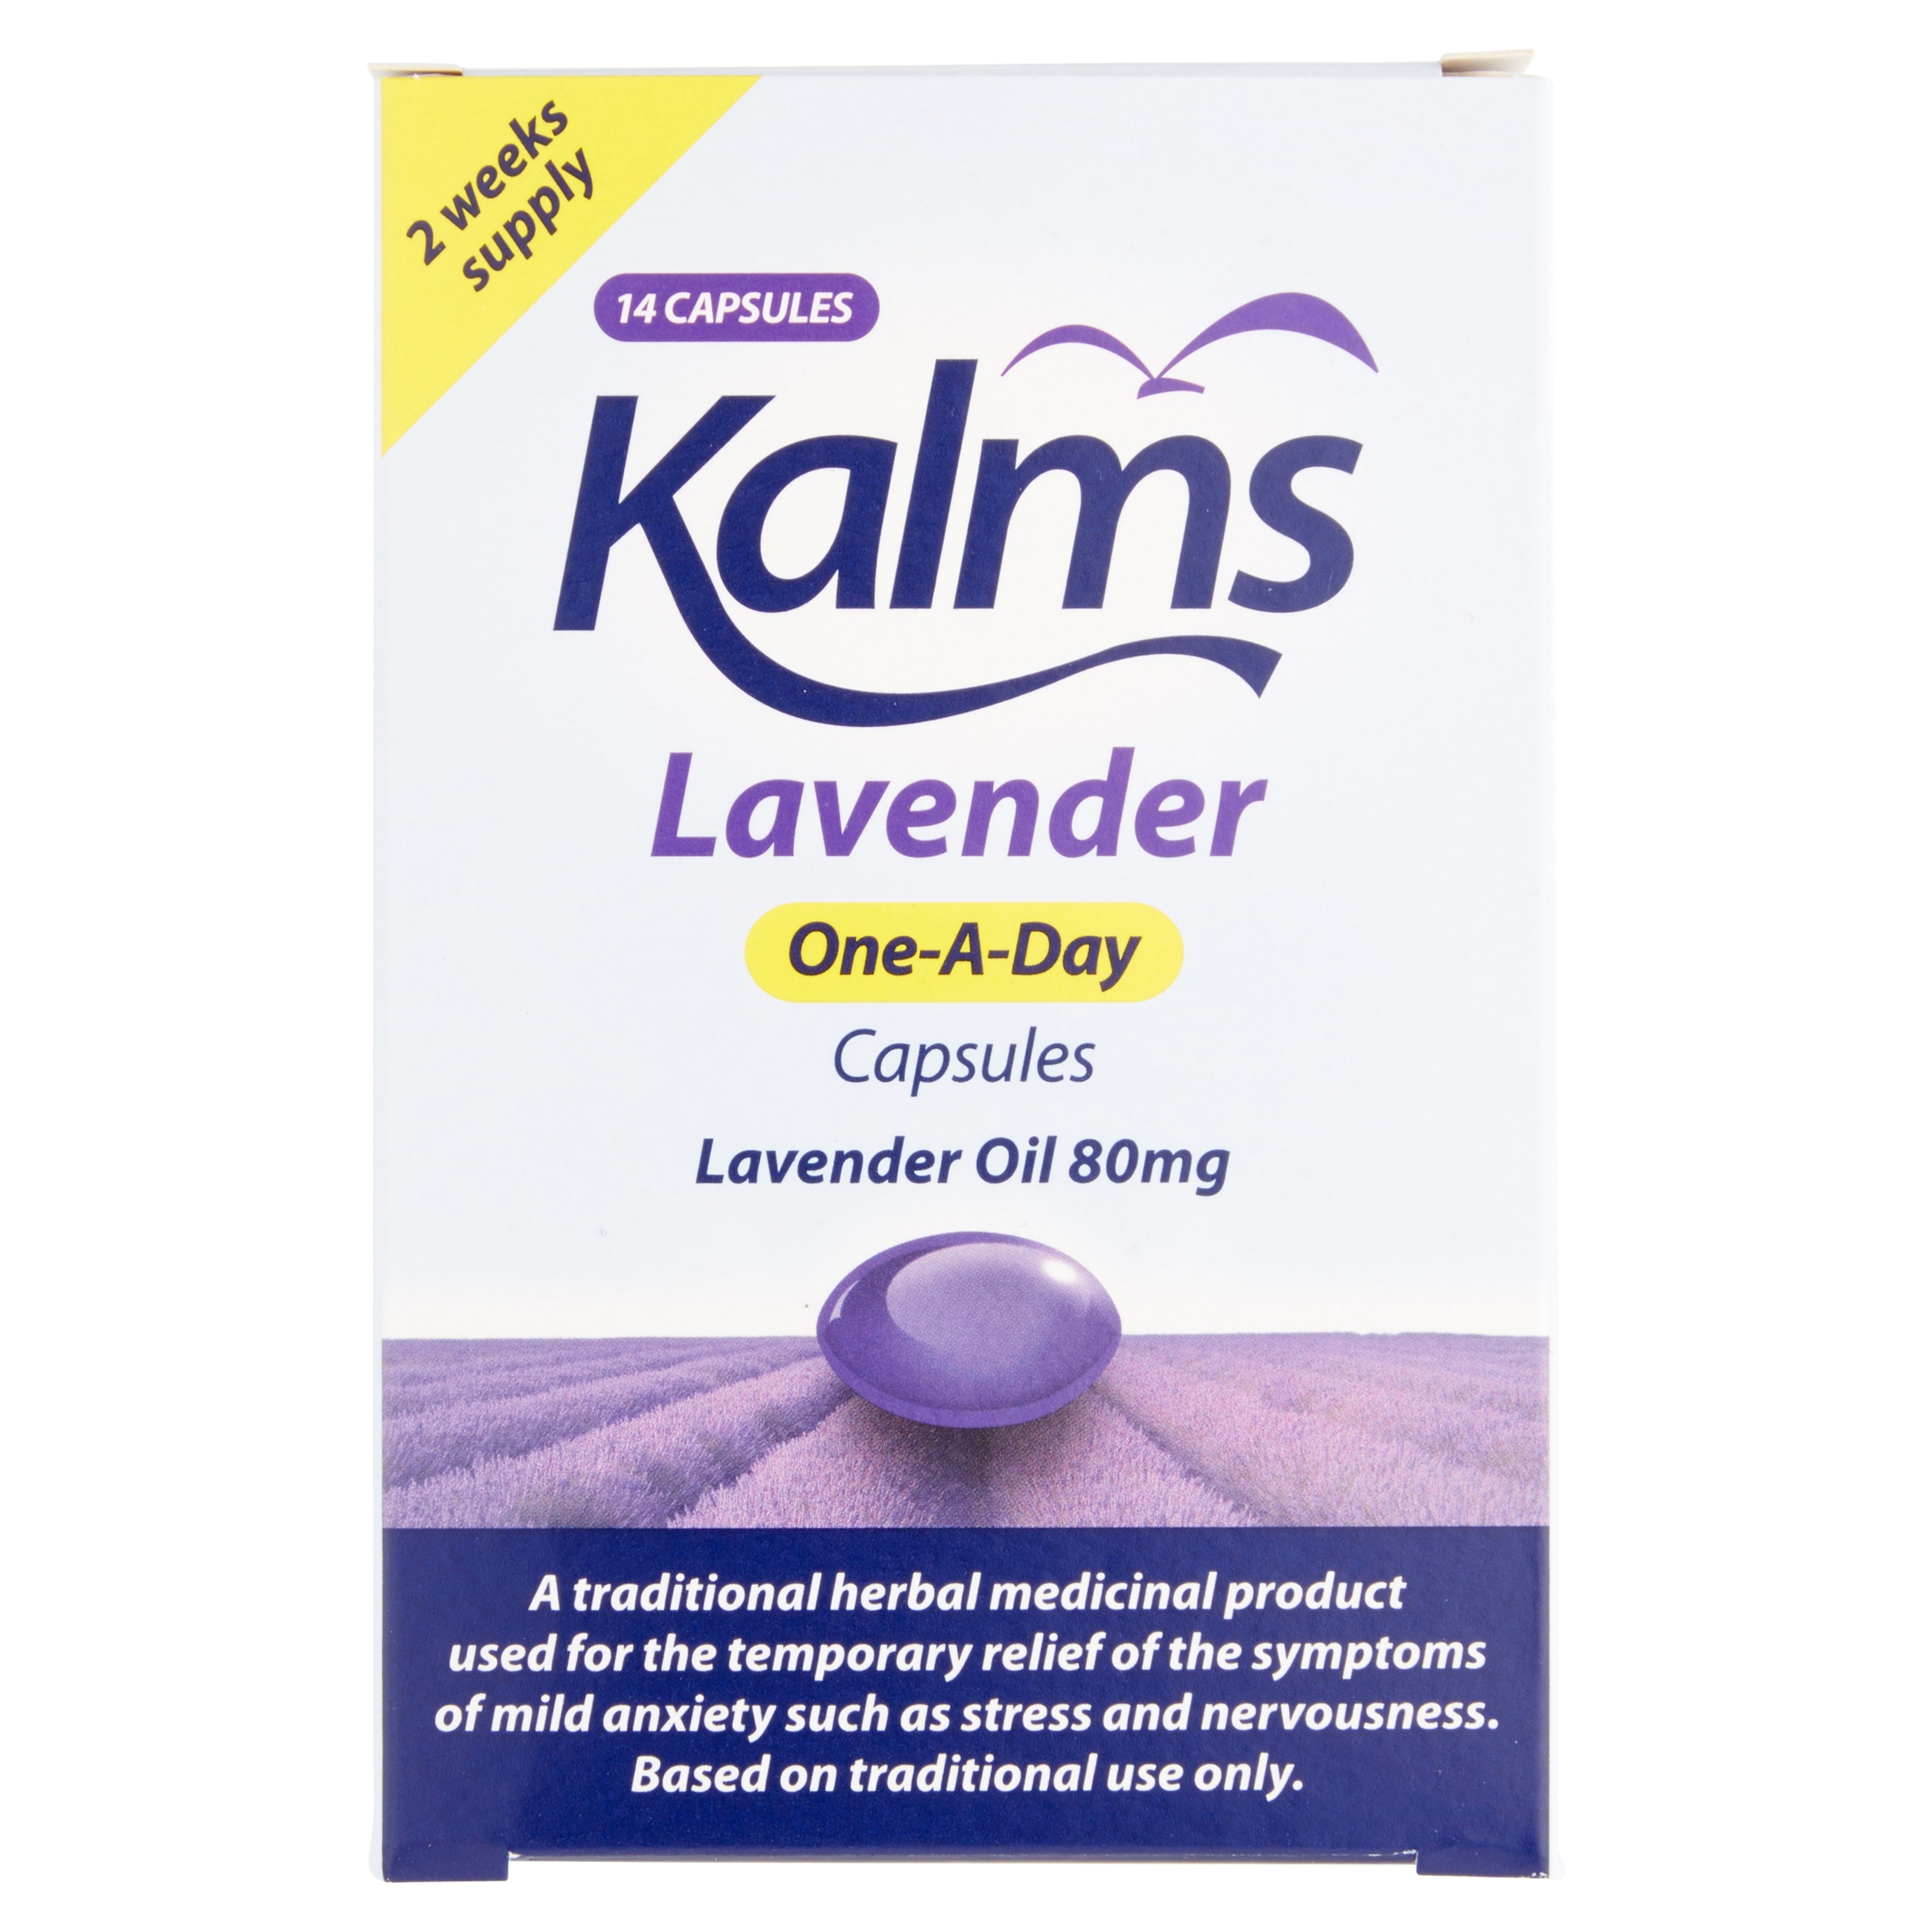 Kalms Lavender One-A-Day Capsules, Herbal, For Anxiety, Stress, Nervousness